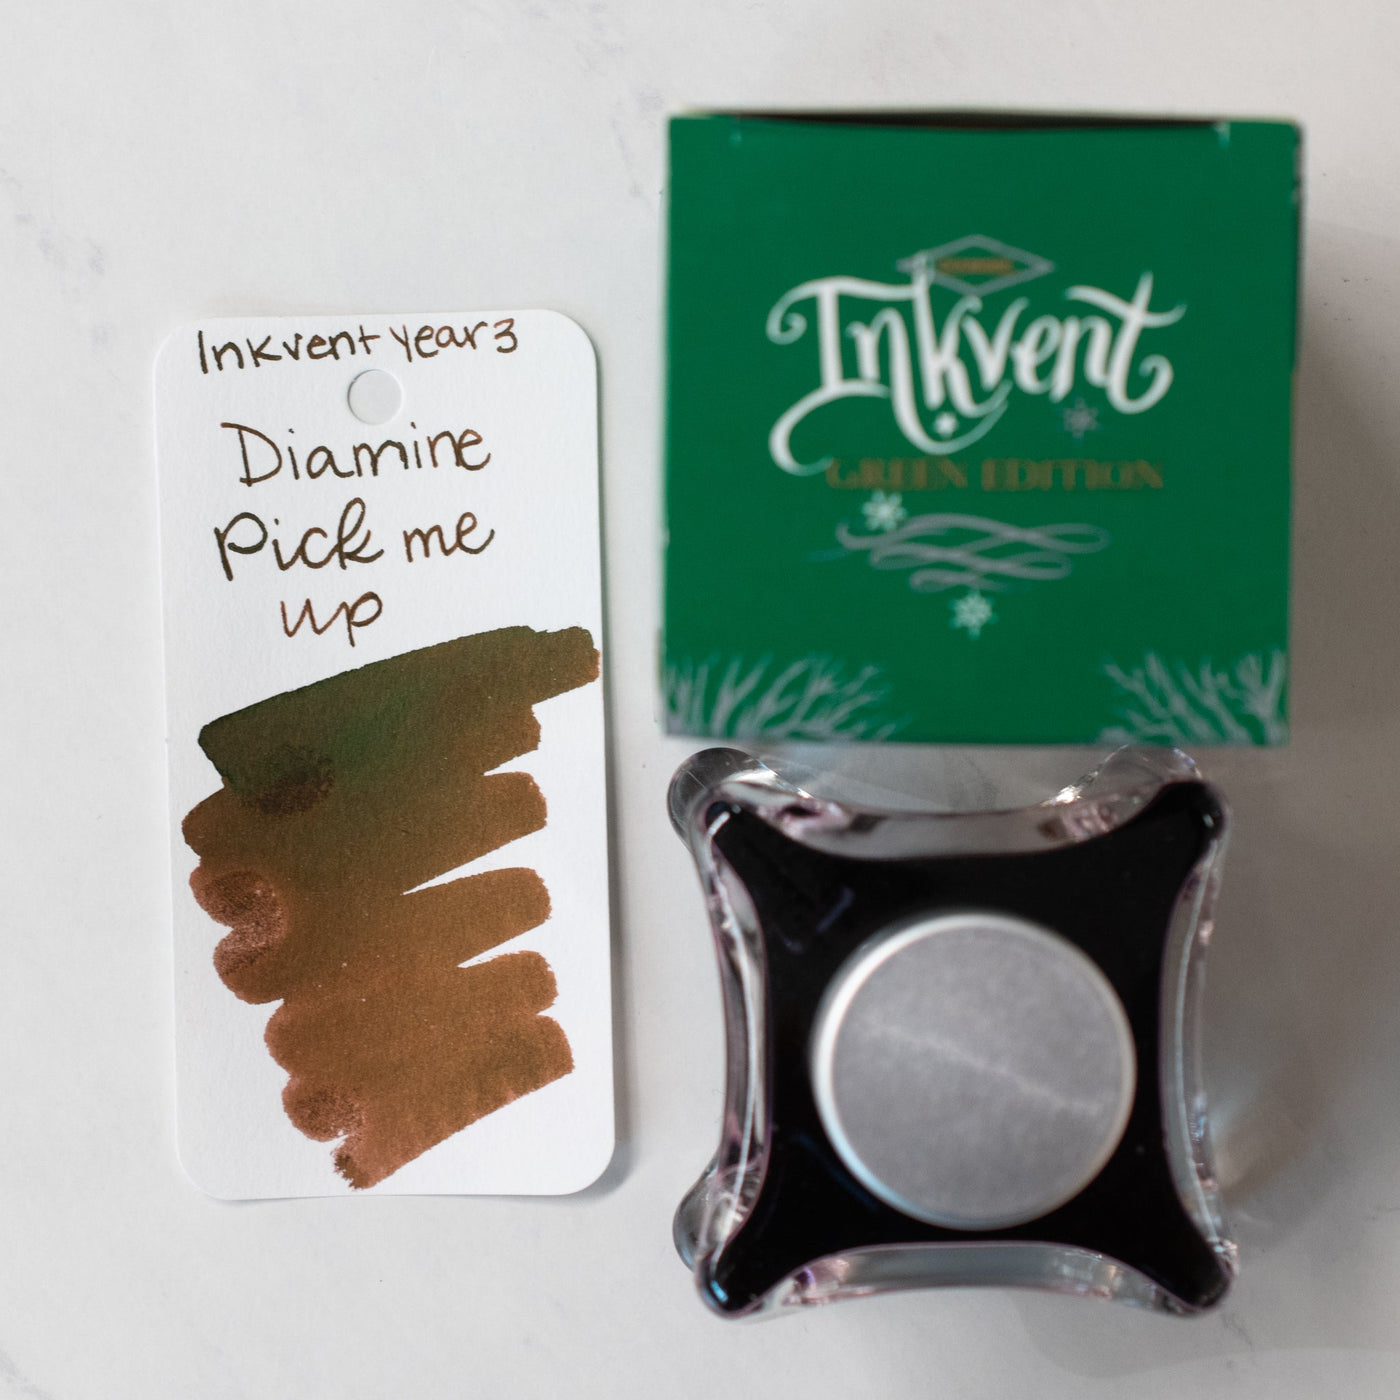 Diamine Inkvent Year 3 Pick Me Up Ink 50mL Glass Bottle